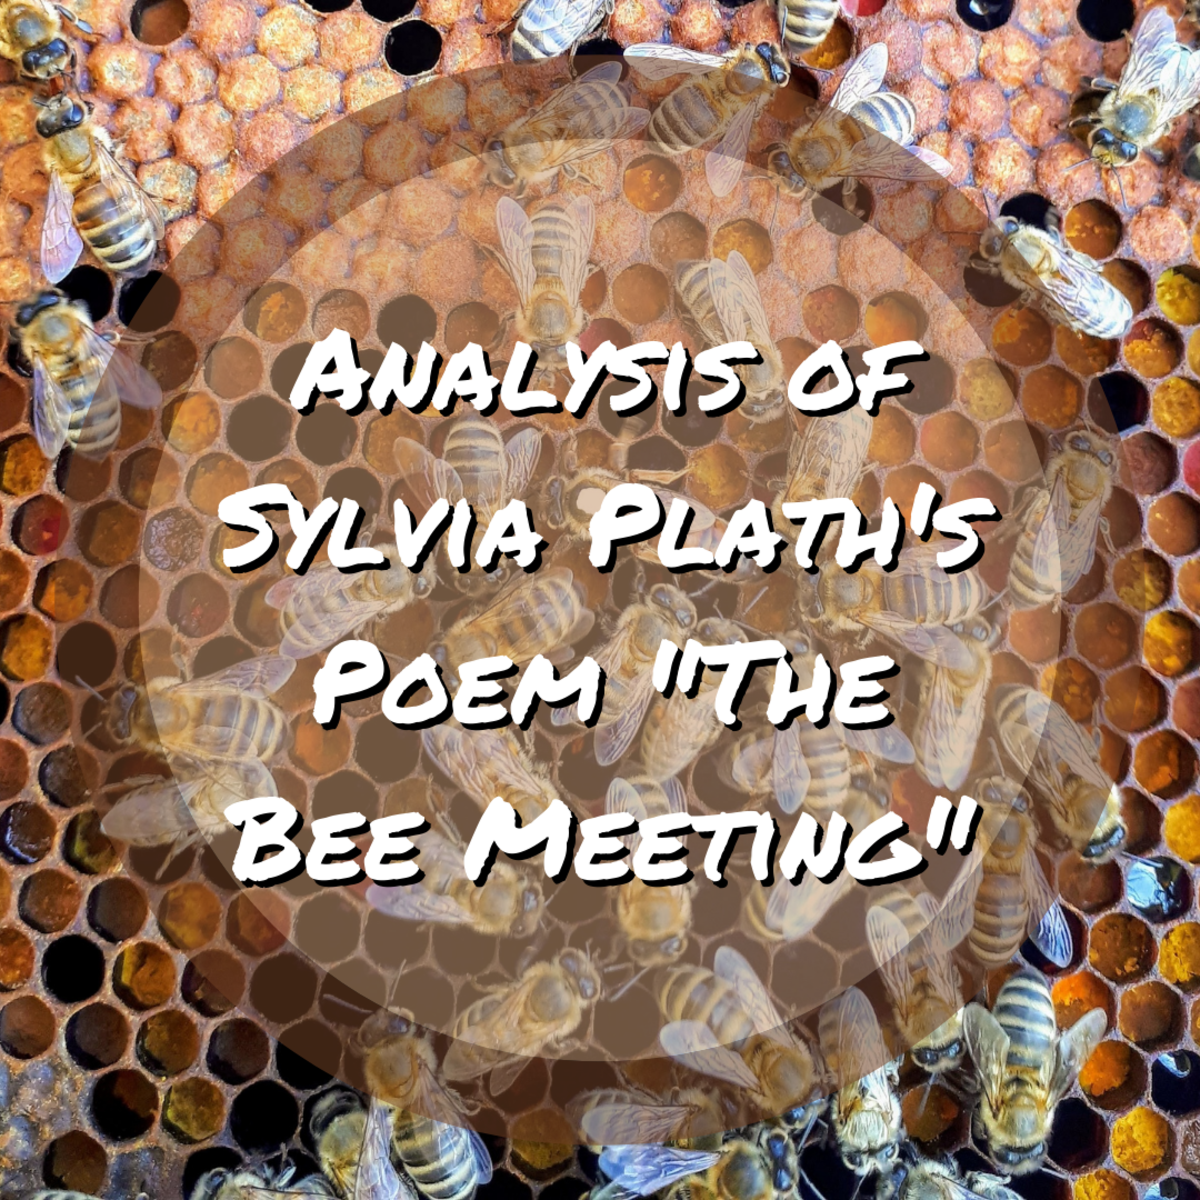 This article provides a summary and analysis of the poem "The Bee Meeting: by Sylvia Plath.